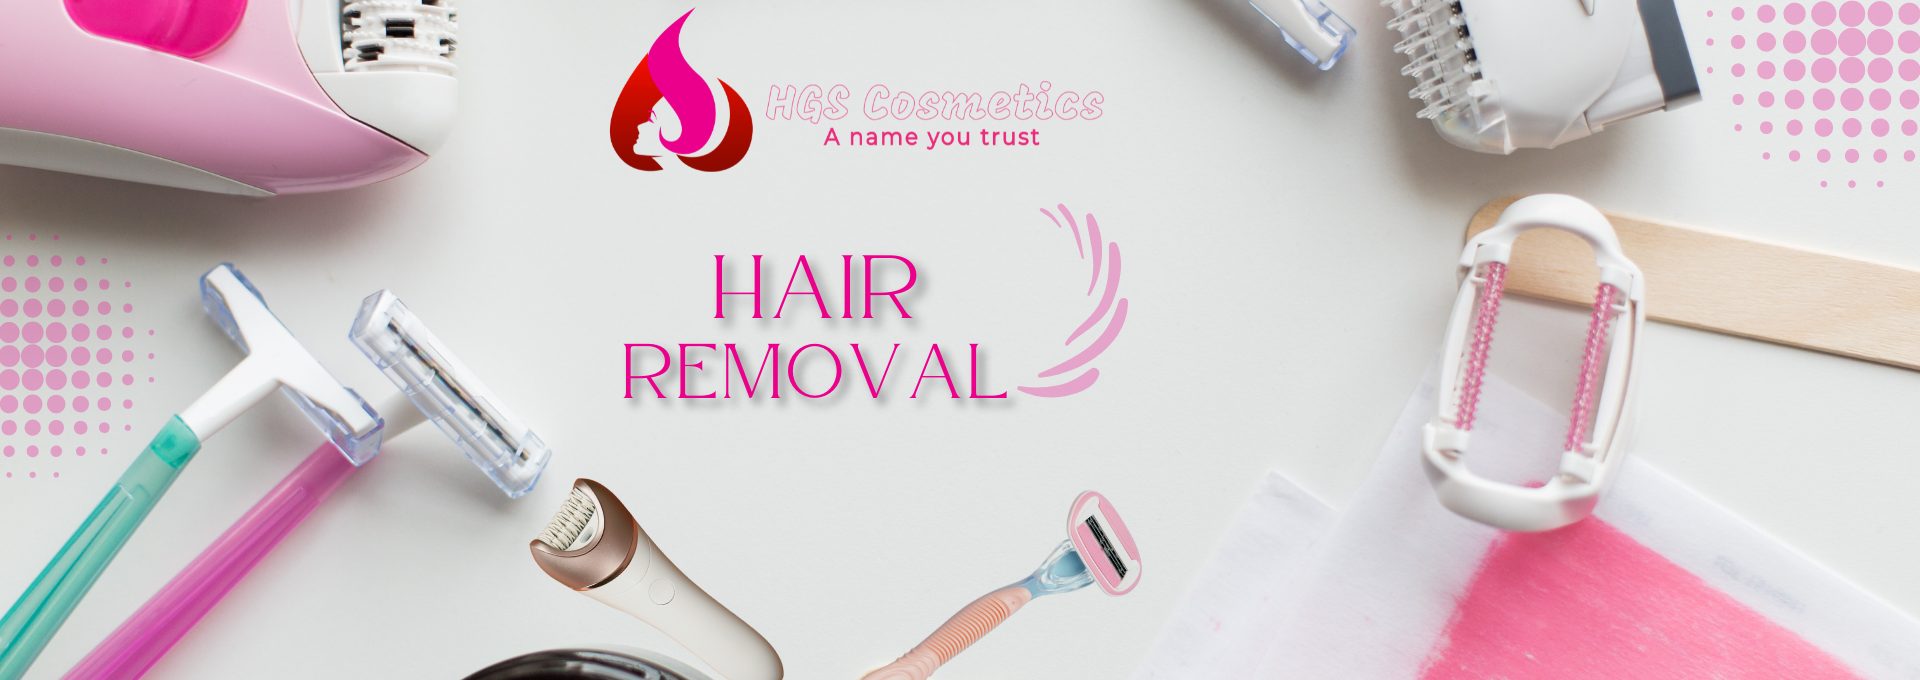 Shop Best Hair Removal products Online @ HGS Cosmetics